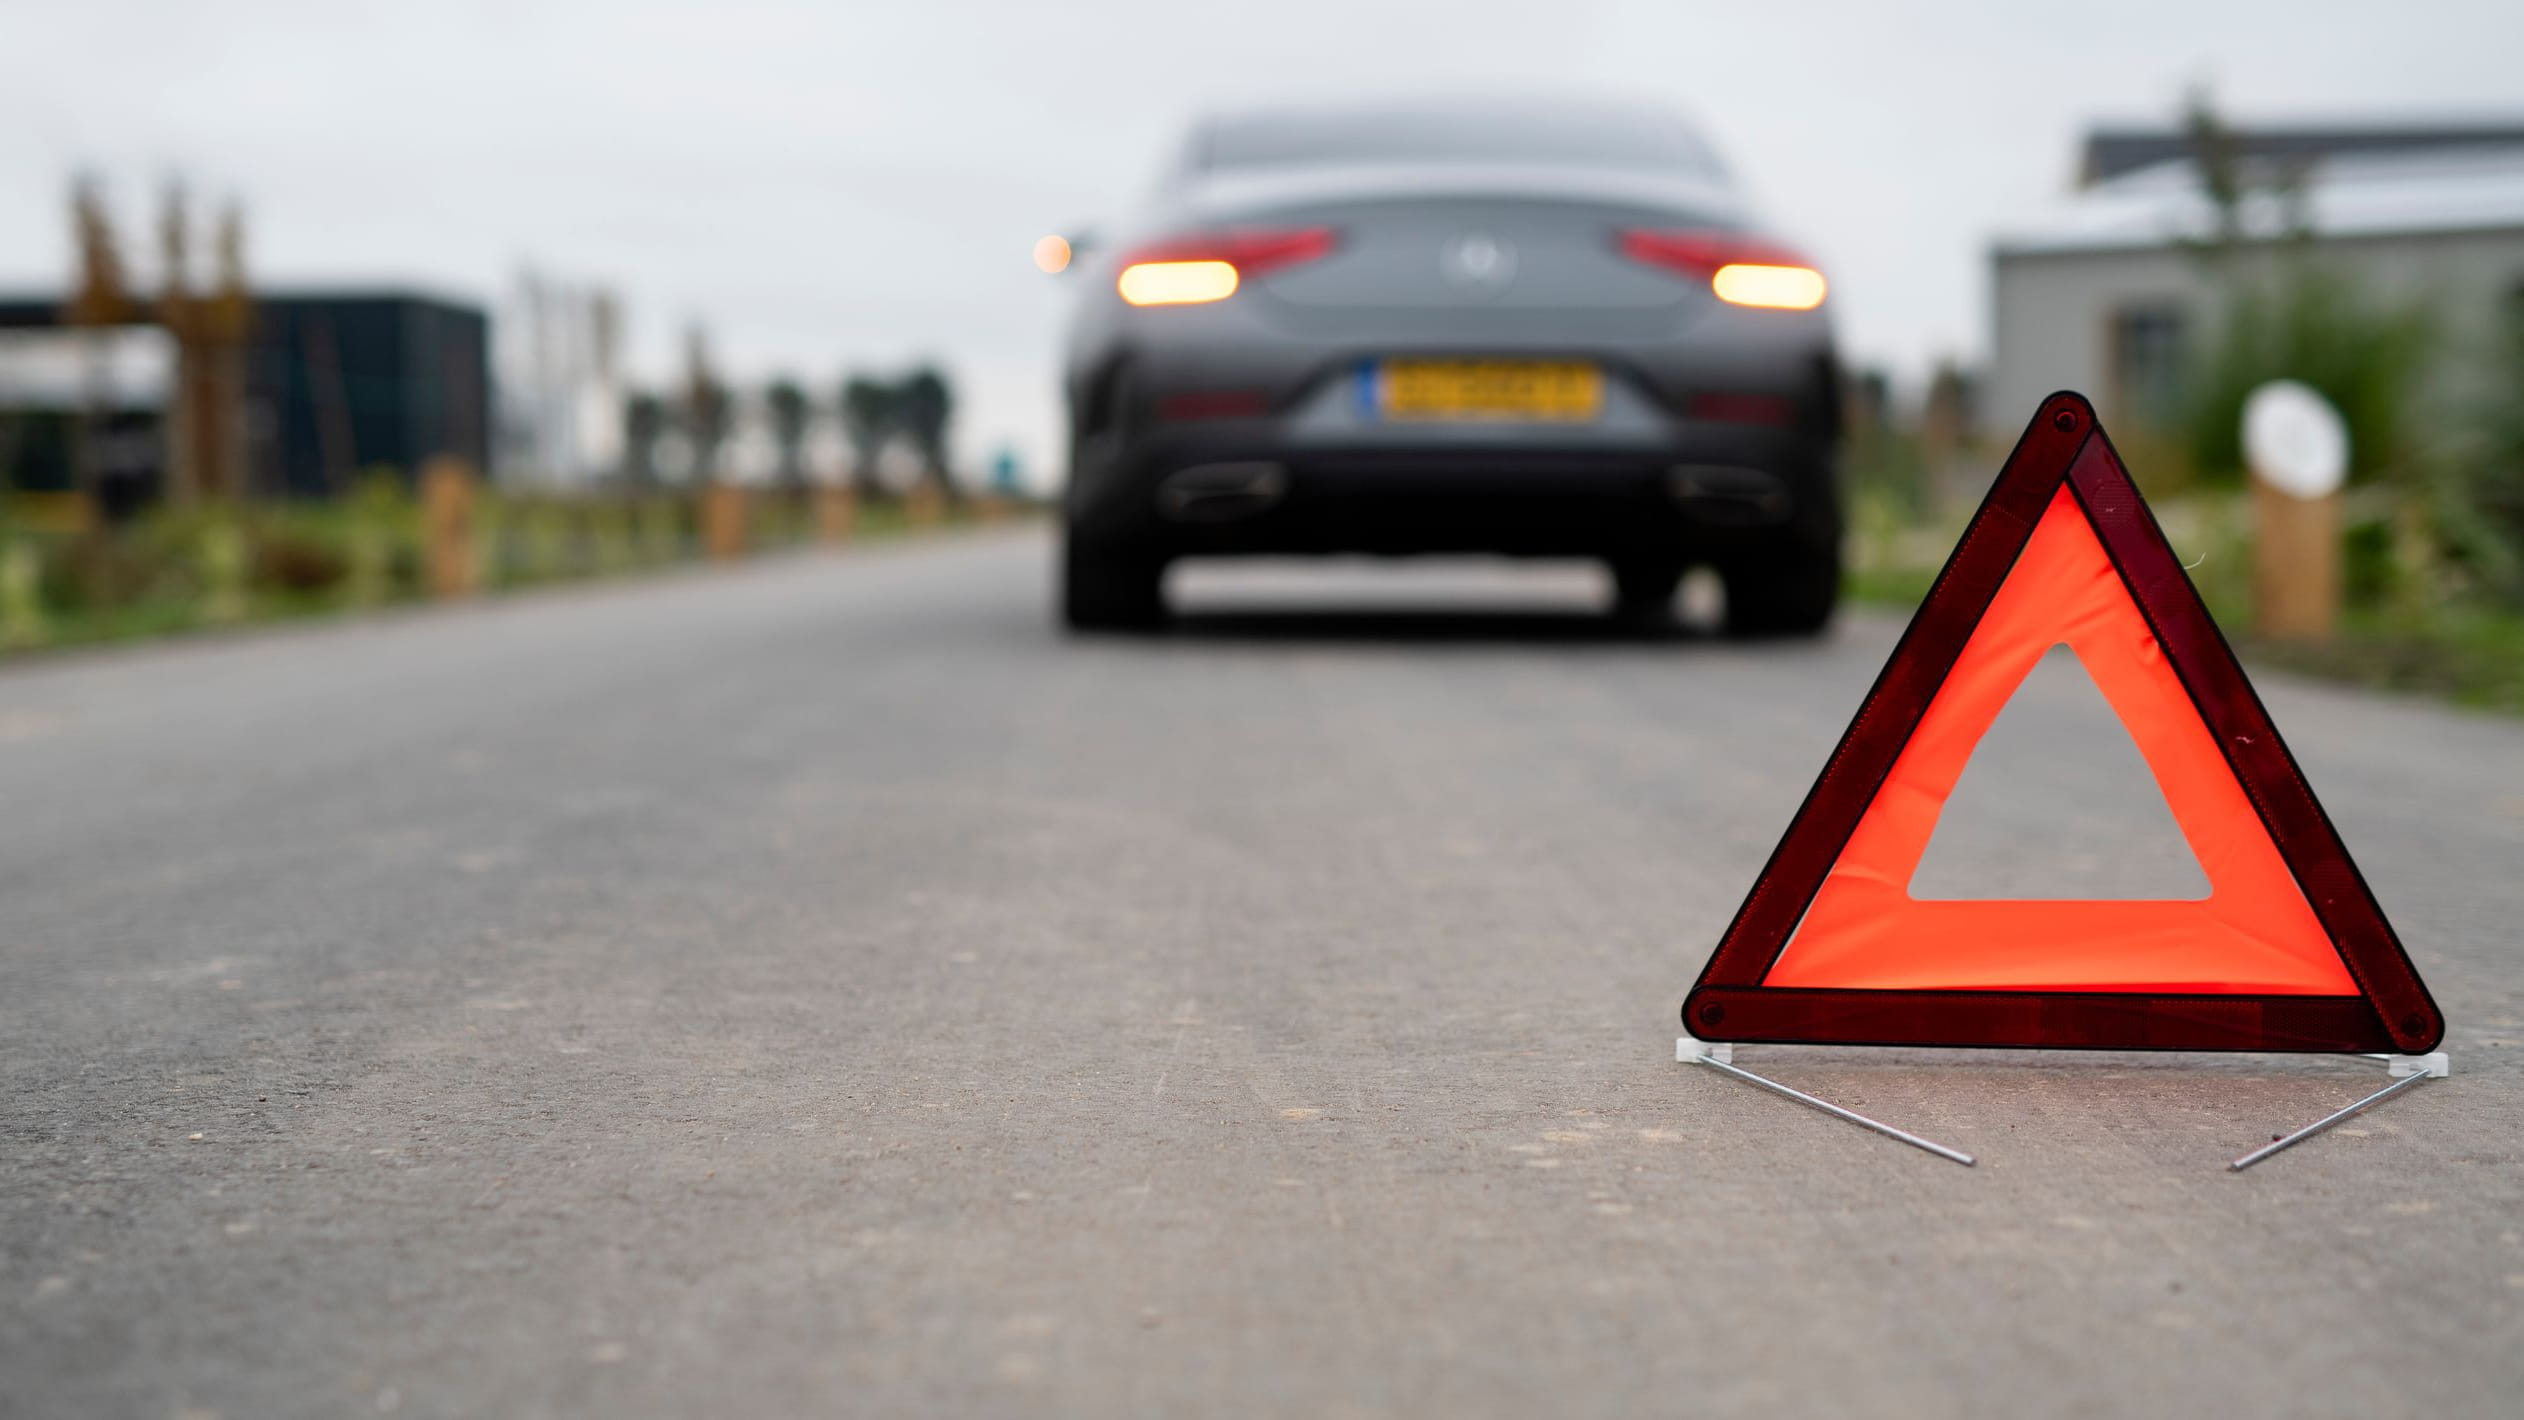 Warning triangle on road with car in background